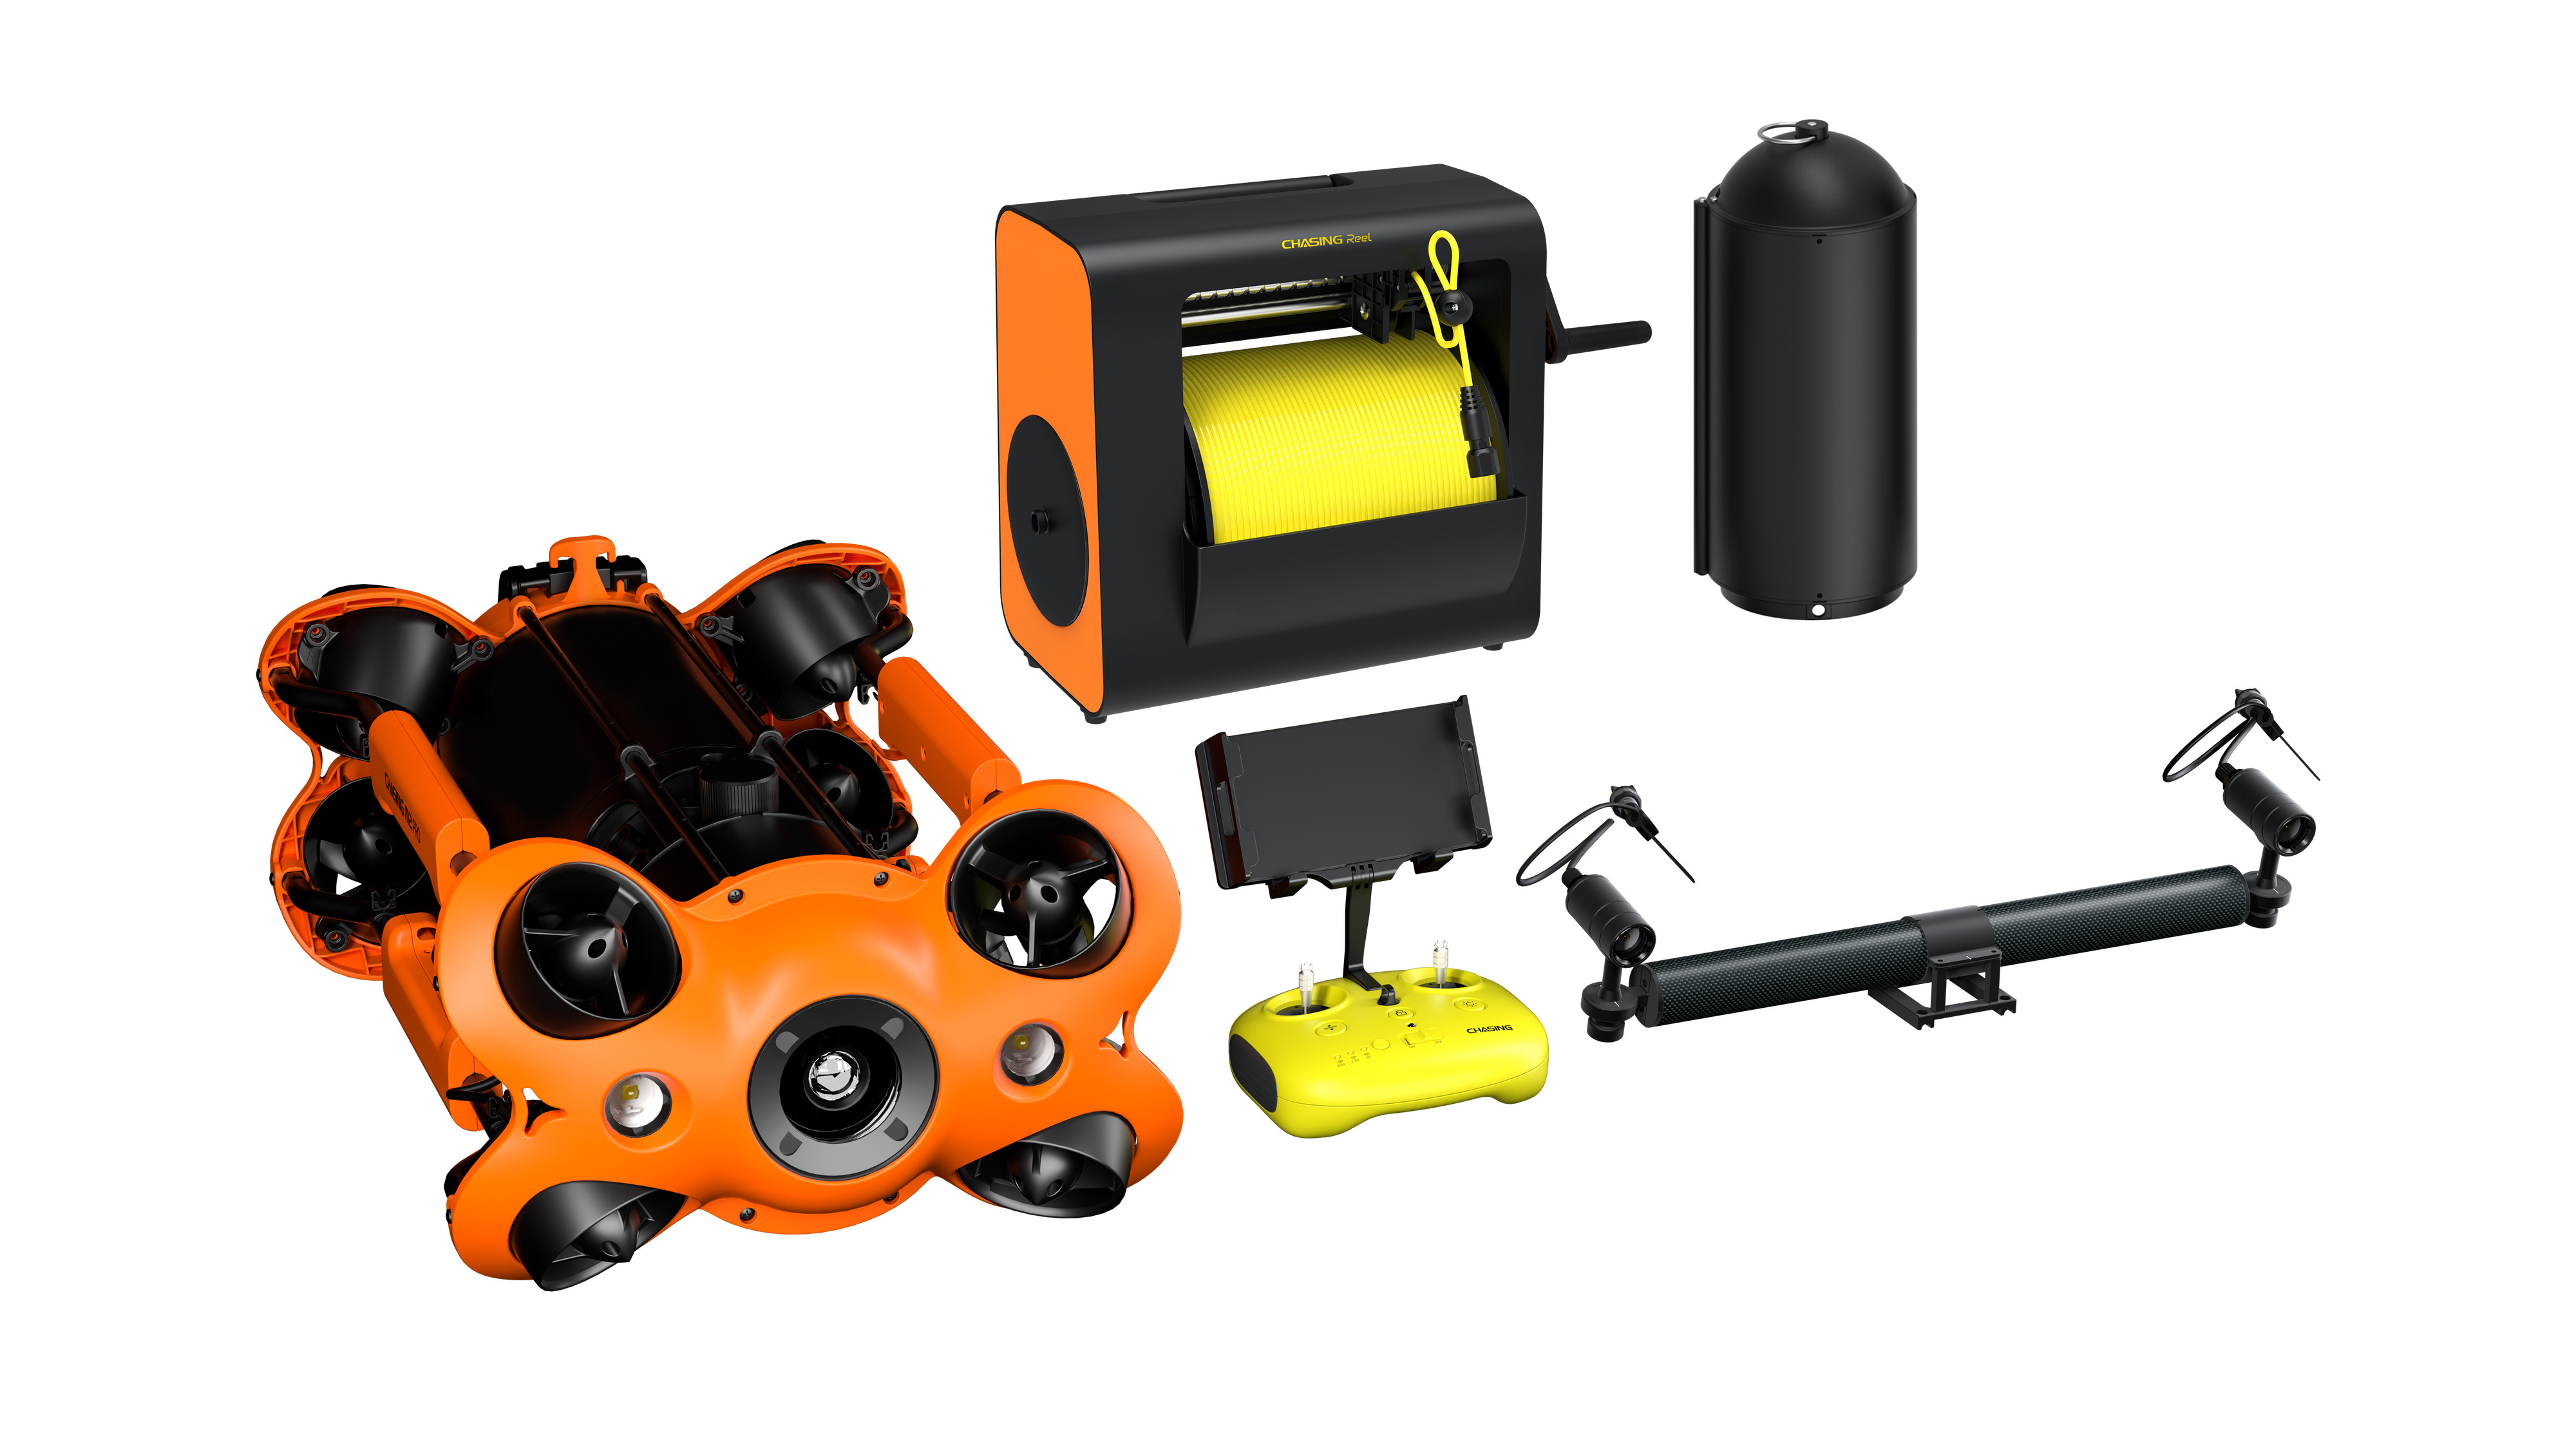 Chasing M2 Pro ROV Advanced Package